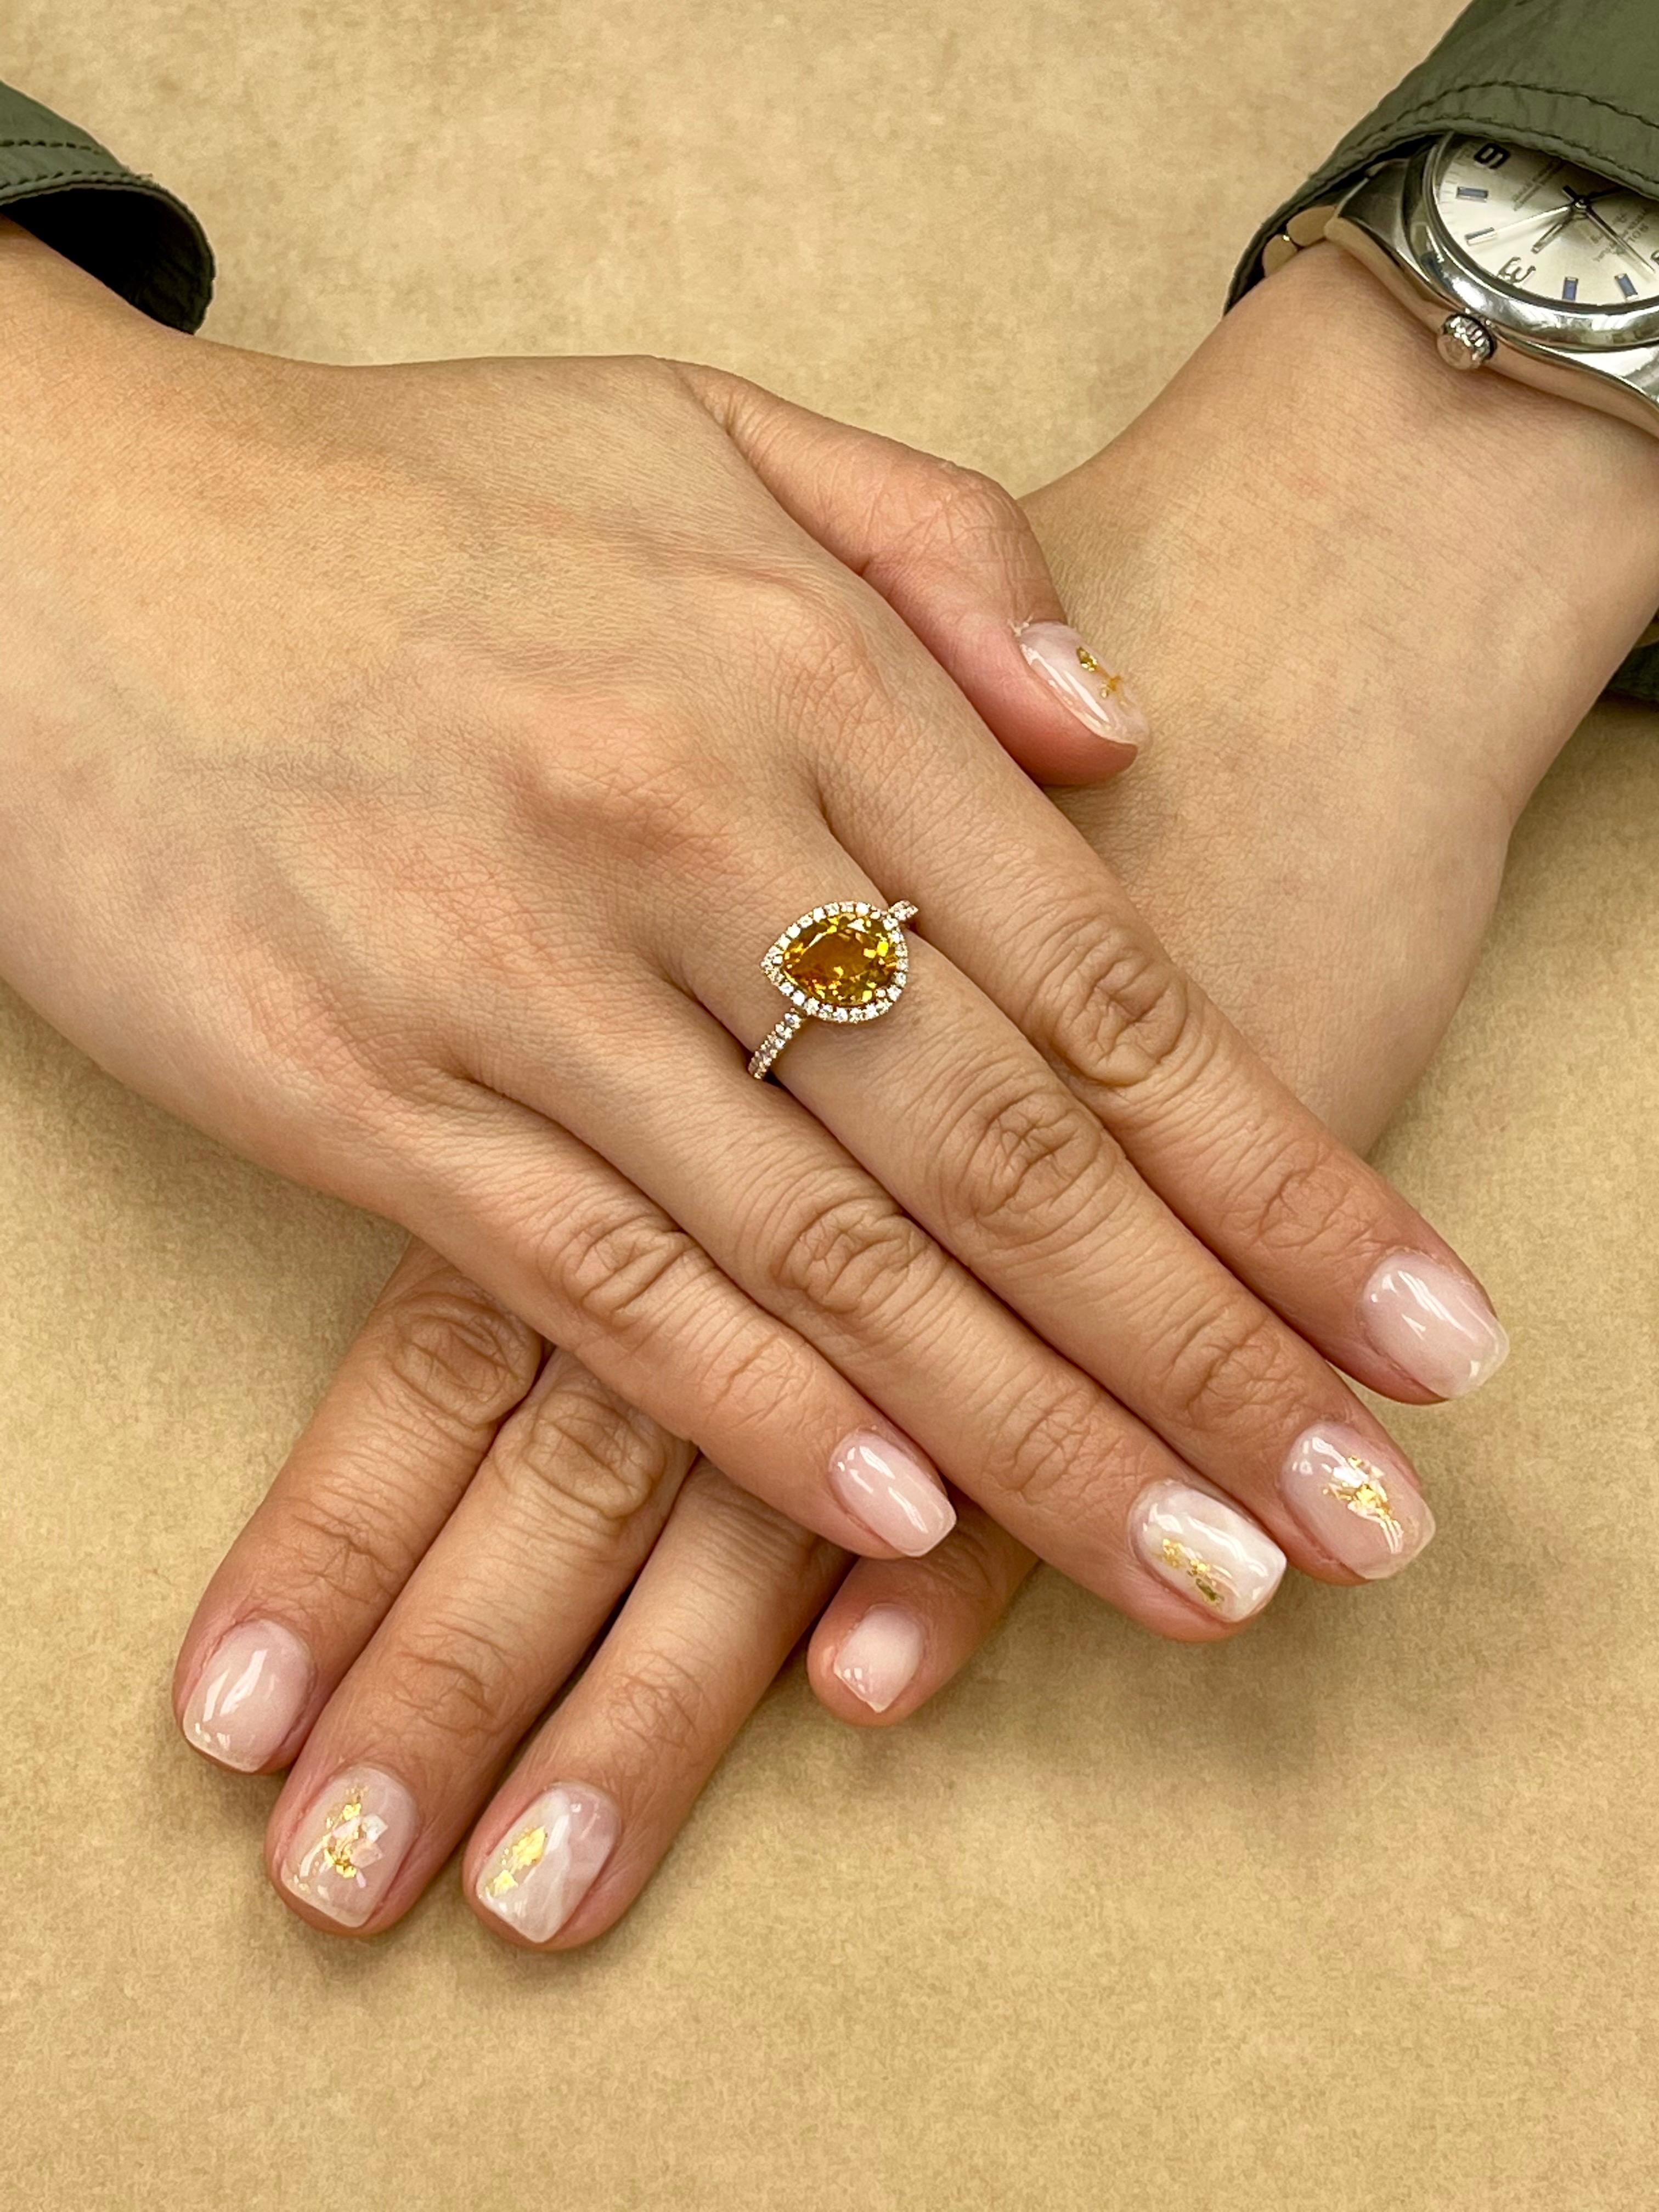 Here is a very elegant ring. Simple yet with an edge in design. The ring is set in 18k rose gold and diamonds. There are 0.32 Cts of white diamonds that make up this setting. The 2.38 Cts pear shaped Citrine is full of life. The color of the citrine